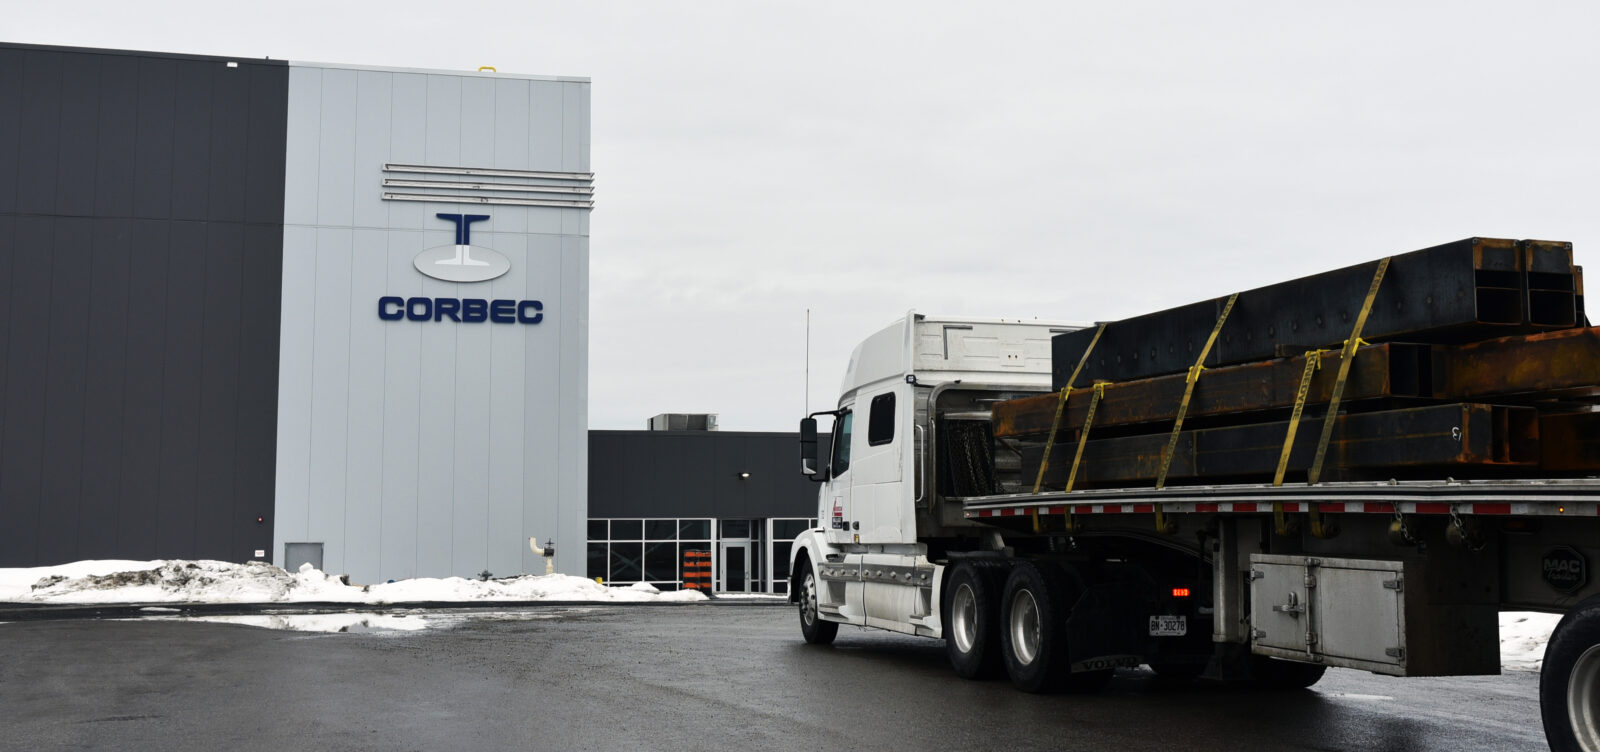 Exterior photo of the plant showing a double-height building with grey cladding and a prominent Corbec logo. A flatbed truck carrying rods of steel is in the foreground approaching the building.